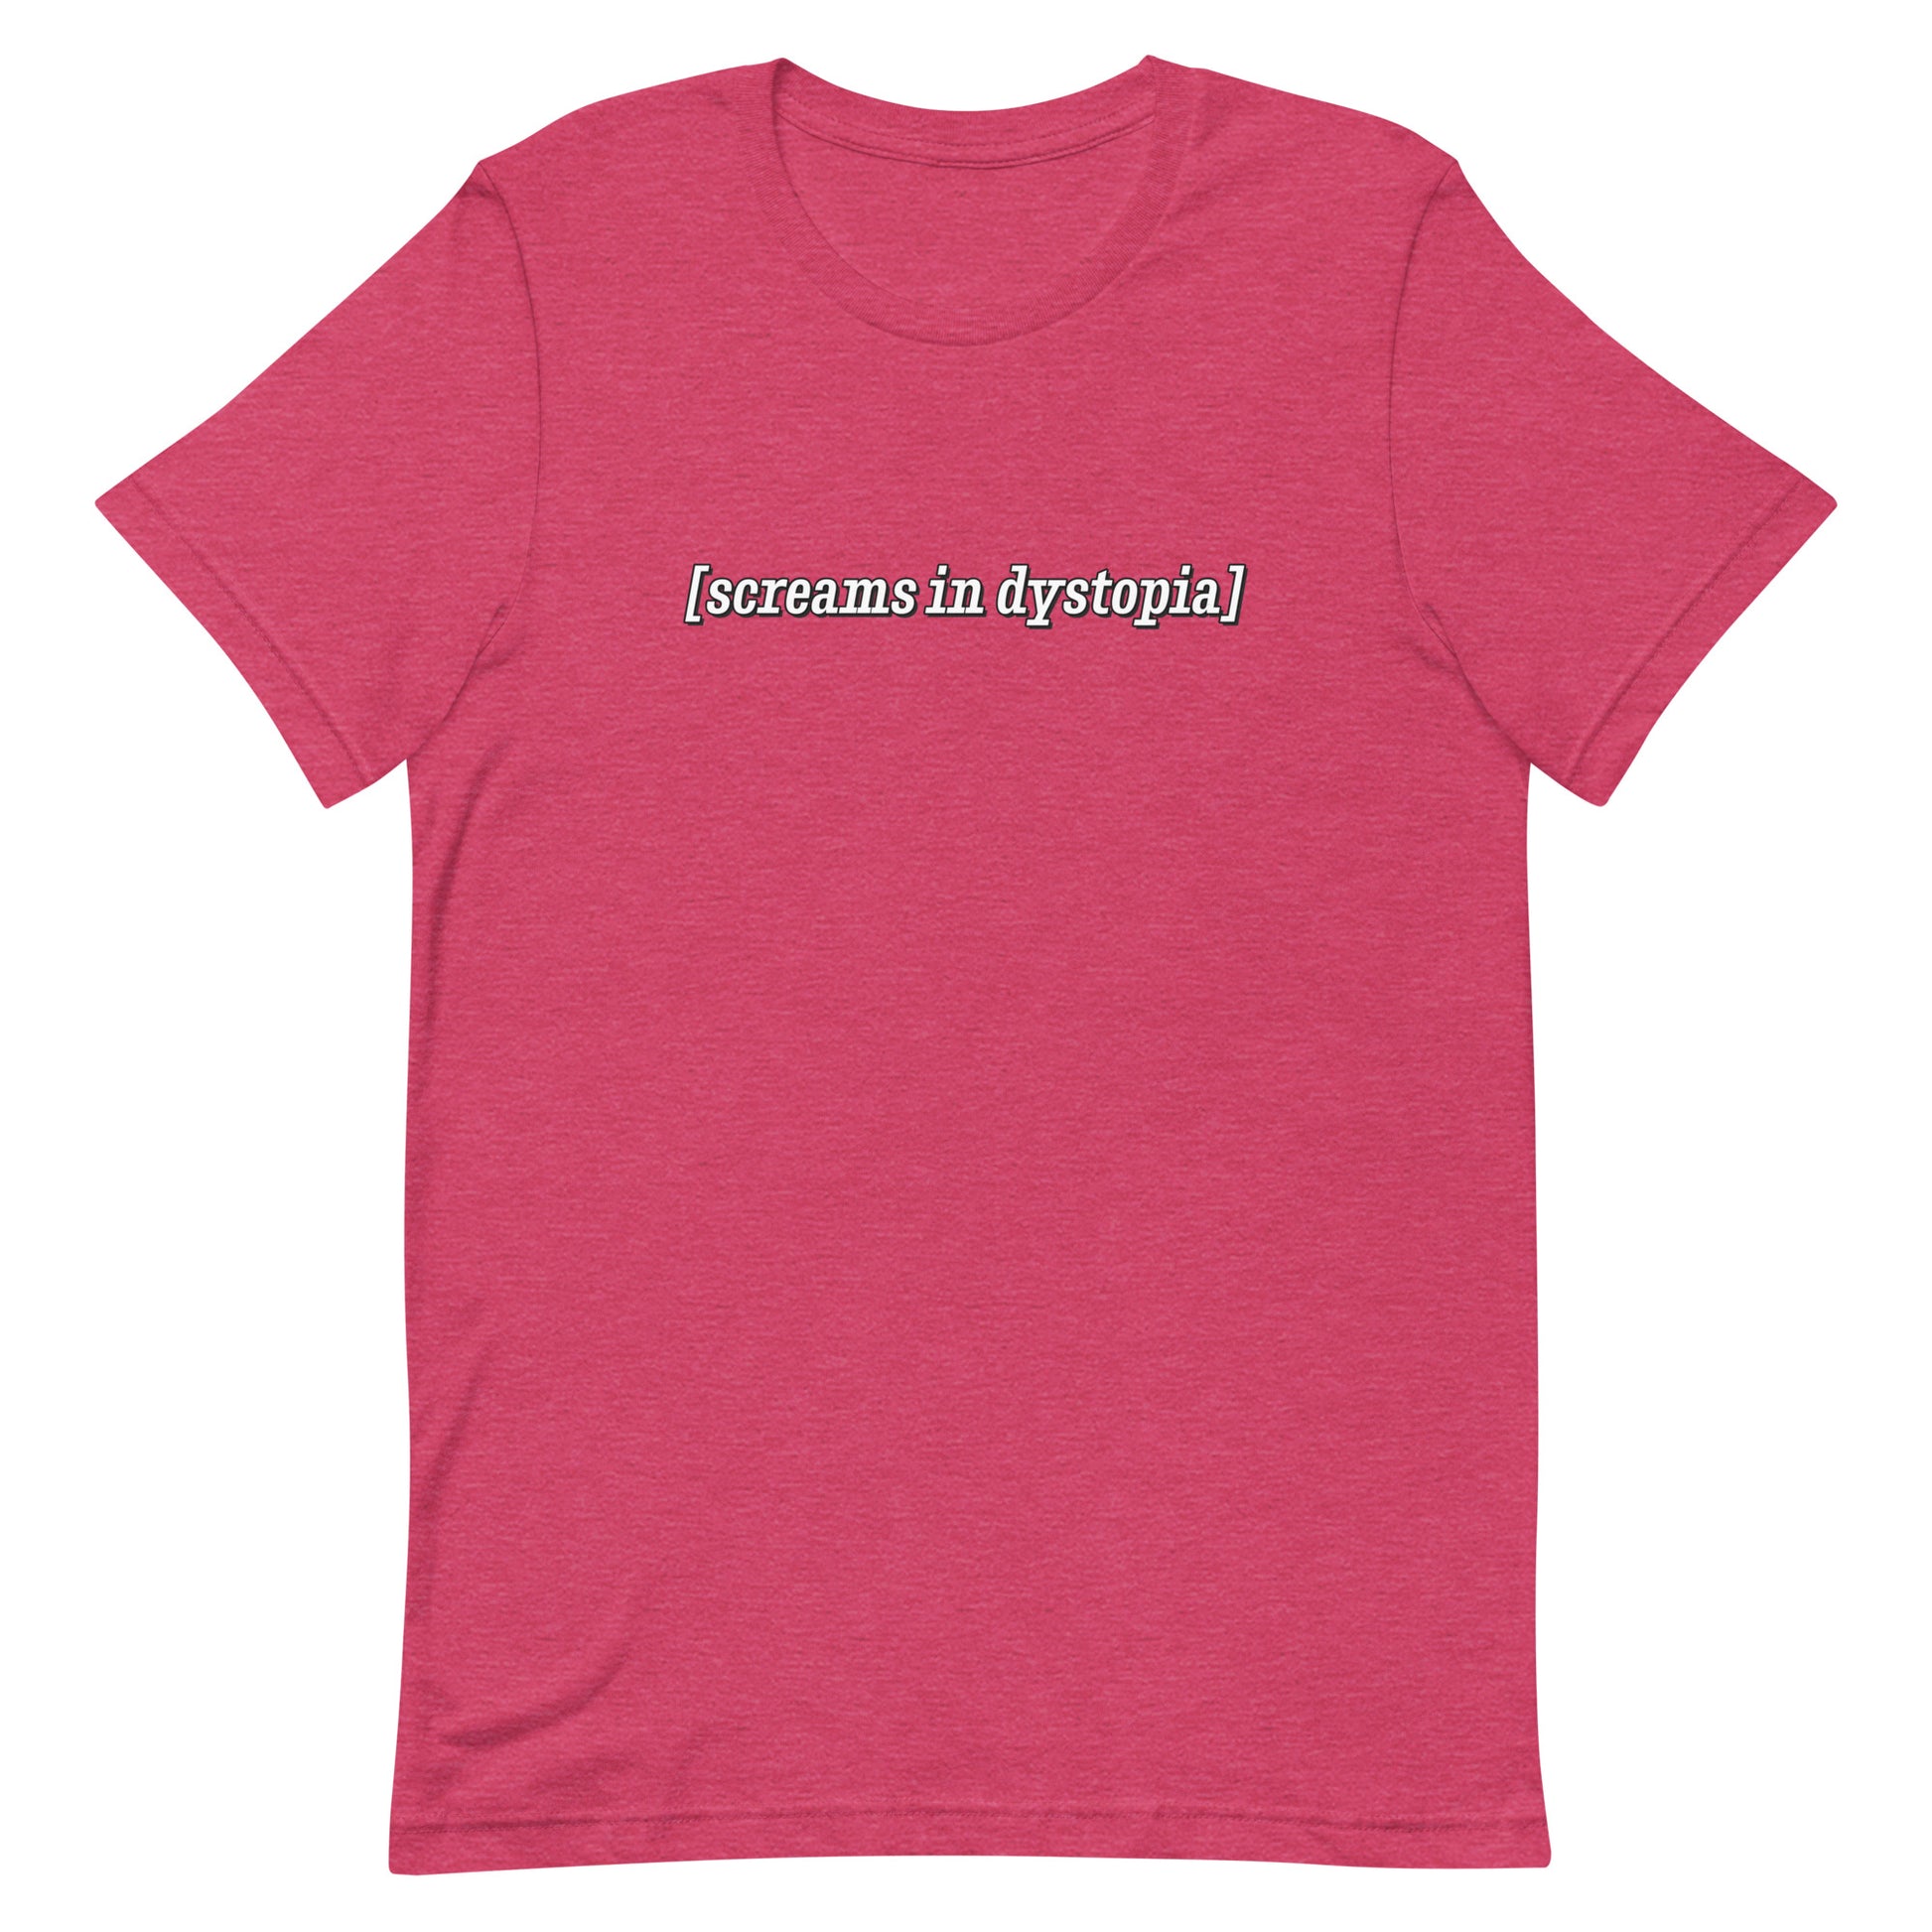 A heathered pink crewneck t-shirt with white text in the style of subtitles. The text reads "[screams in dystopia]".